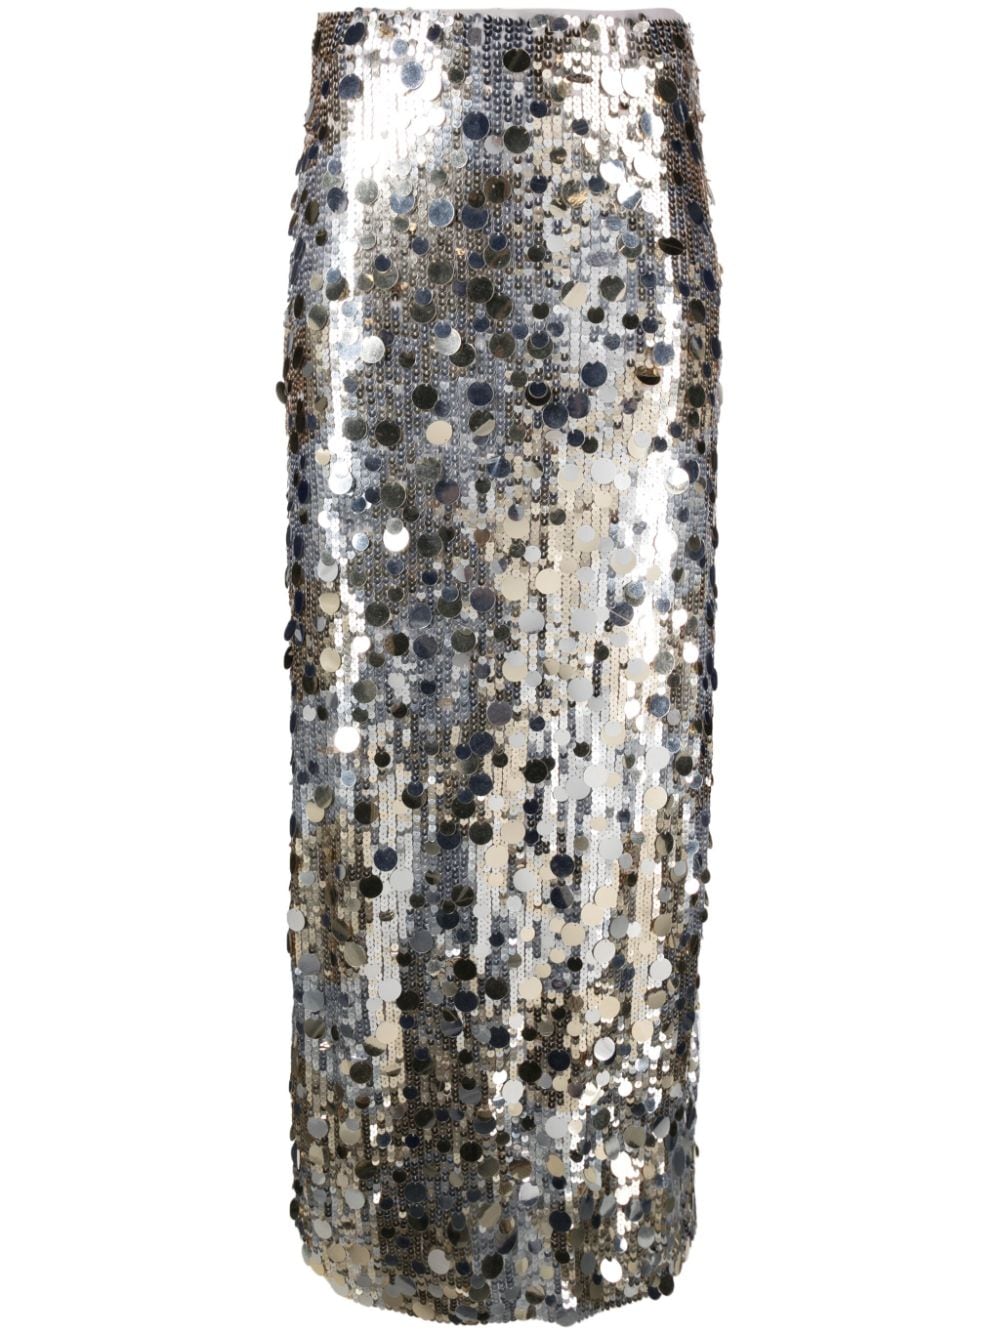 P.A.R.O.S.H. Gonna paillette-embellished high-waisted skirt - Silver von P.A.R.O.S.H.